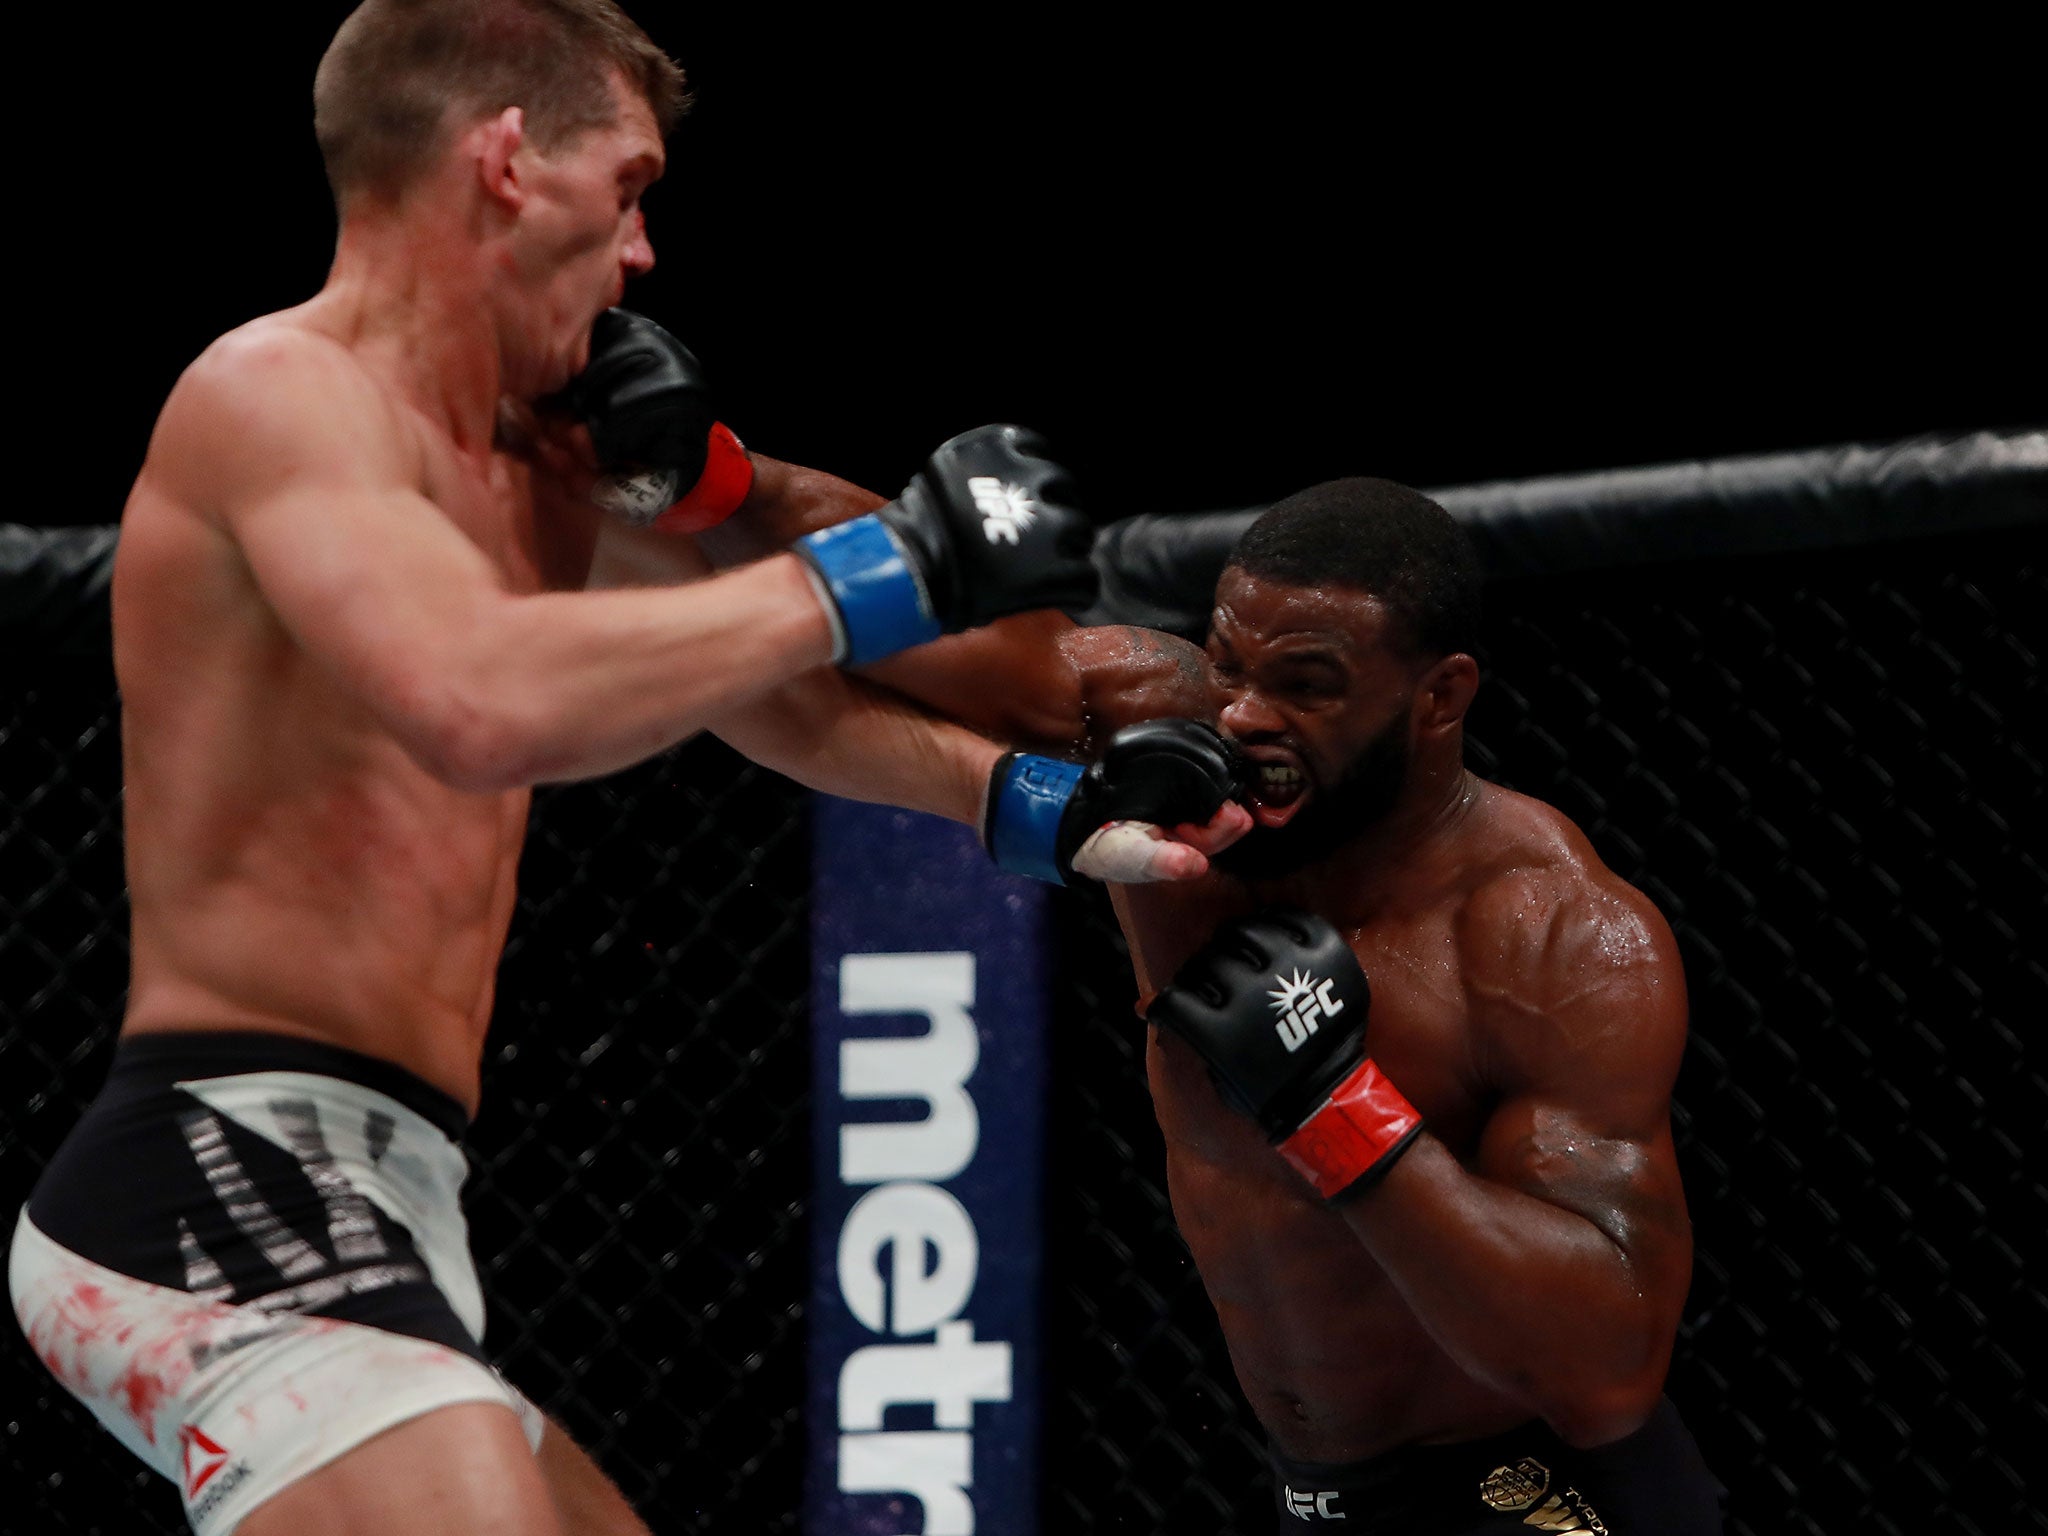 Stephen Thompson and Tyron Woodley rematch at UFC 209 following their entertaining majority draw